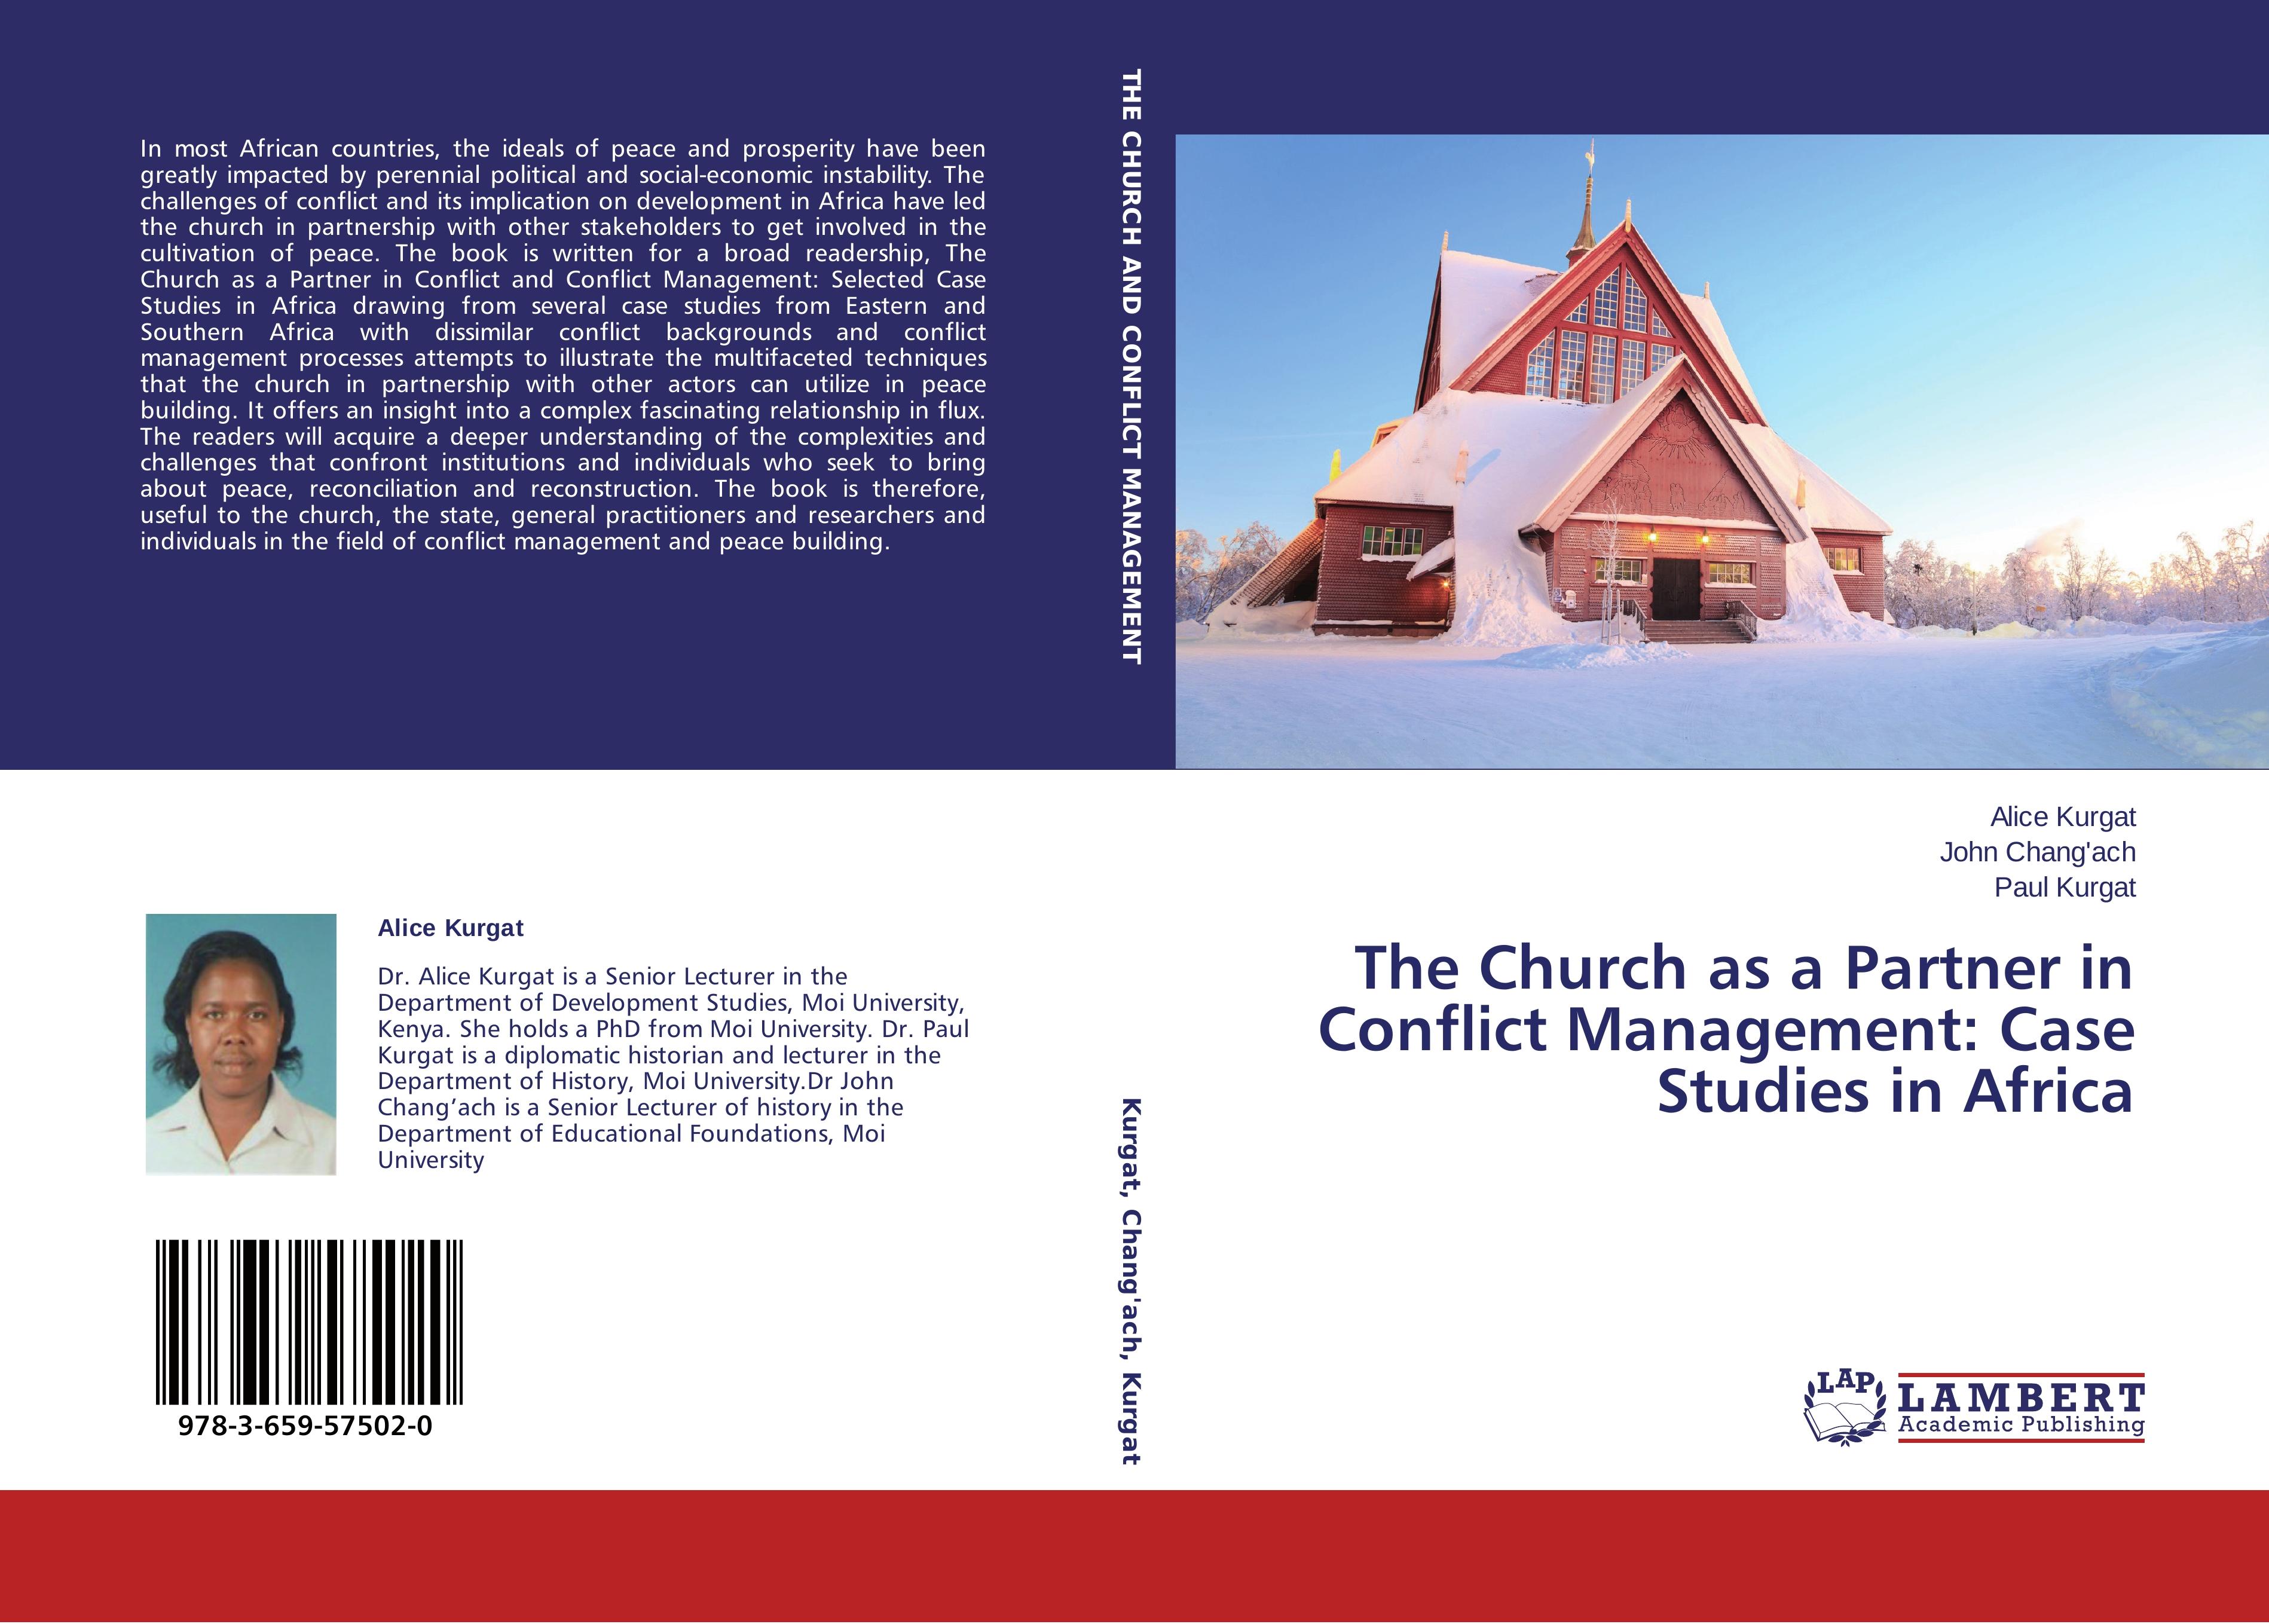 The Church as a Partner in Conflict Management: Case Studies in Africa - Alice Kurgat John Chang ach Paul Kurgat